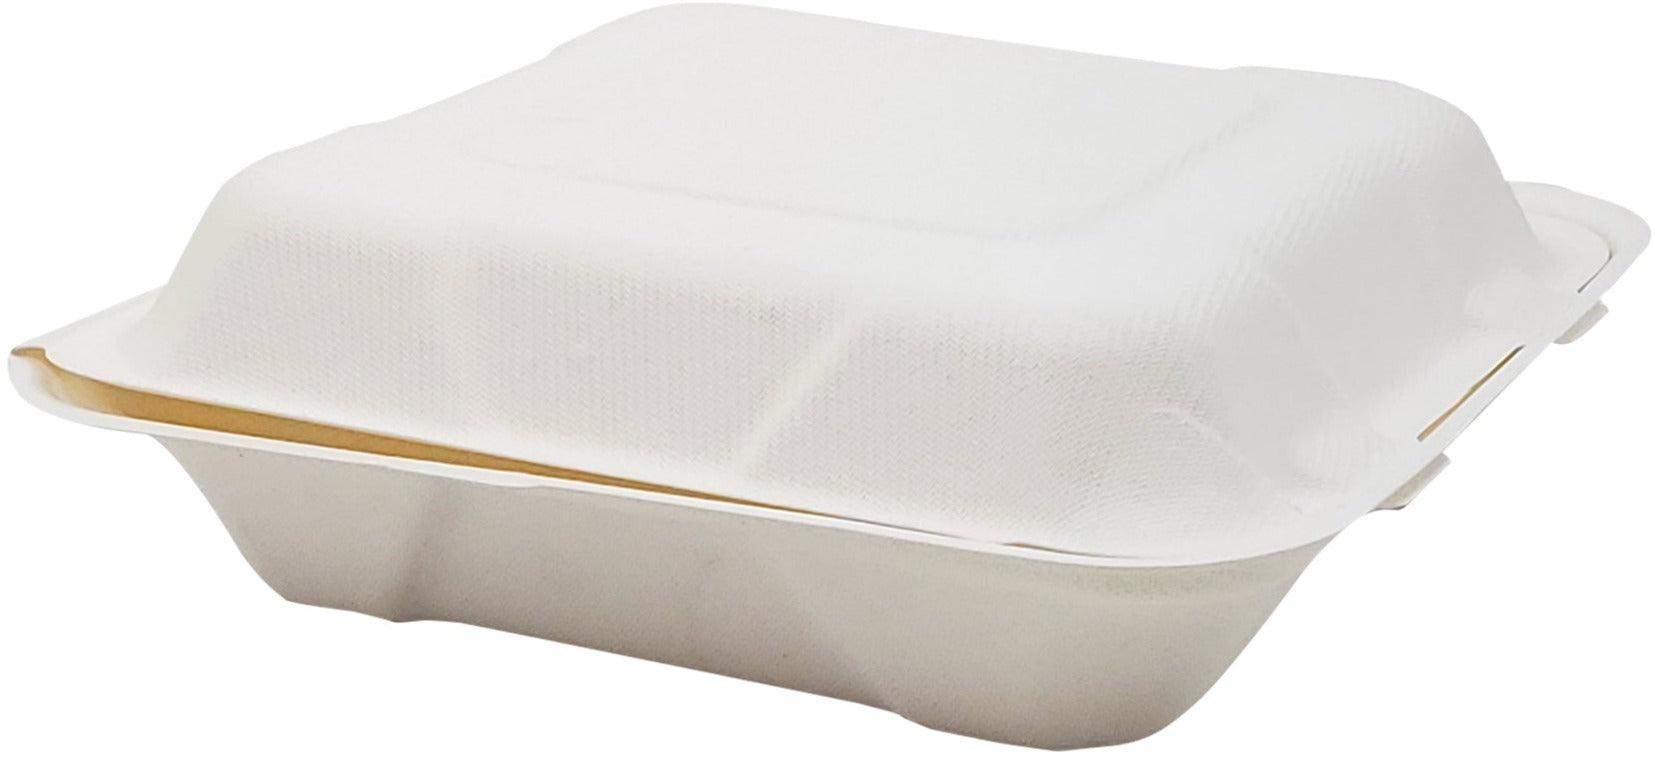 http://www.a1cashandcarry.com/cdn/shop/products/Eco-Craze-8x8-Bagasse-Clamshell-ContainerEM-771-Packaging-Eco-Craze-Eco-Craze-8x8-Bagasse-Clamshell-ContainerEM-771-Packaging-Eco-Craze-Eco-Craze-8x8-Bagasse-Clamshell-ContainerEM-771_a3d73a77-a3d6-4d38-ae37-8bef74c6fba6.jpg?v=1689860451